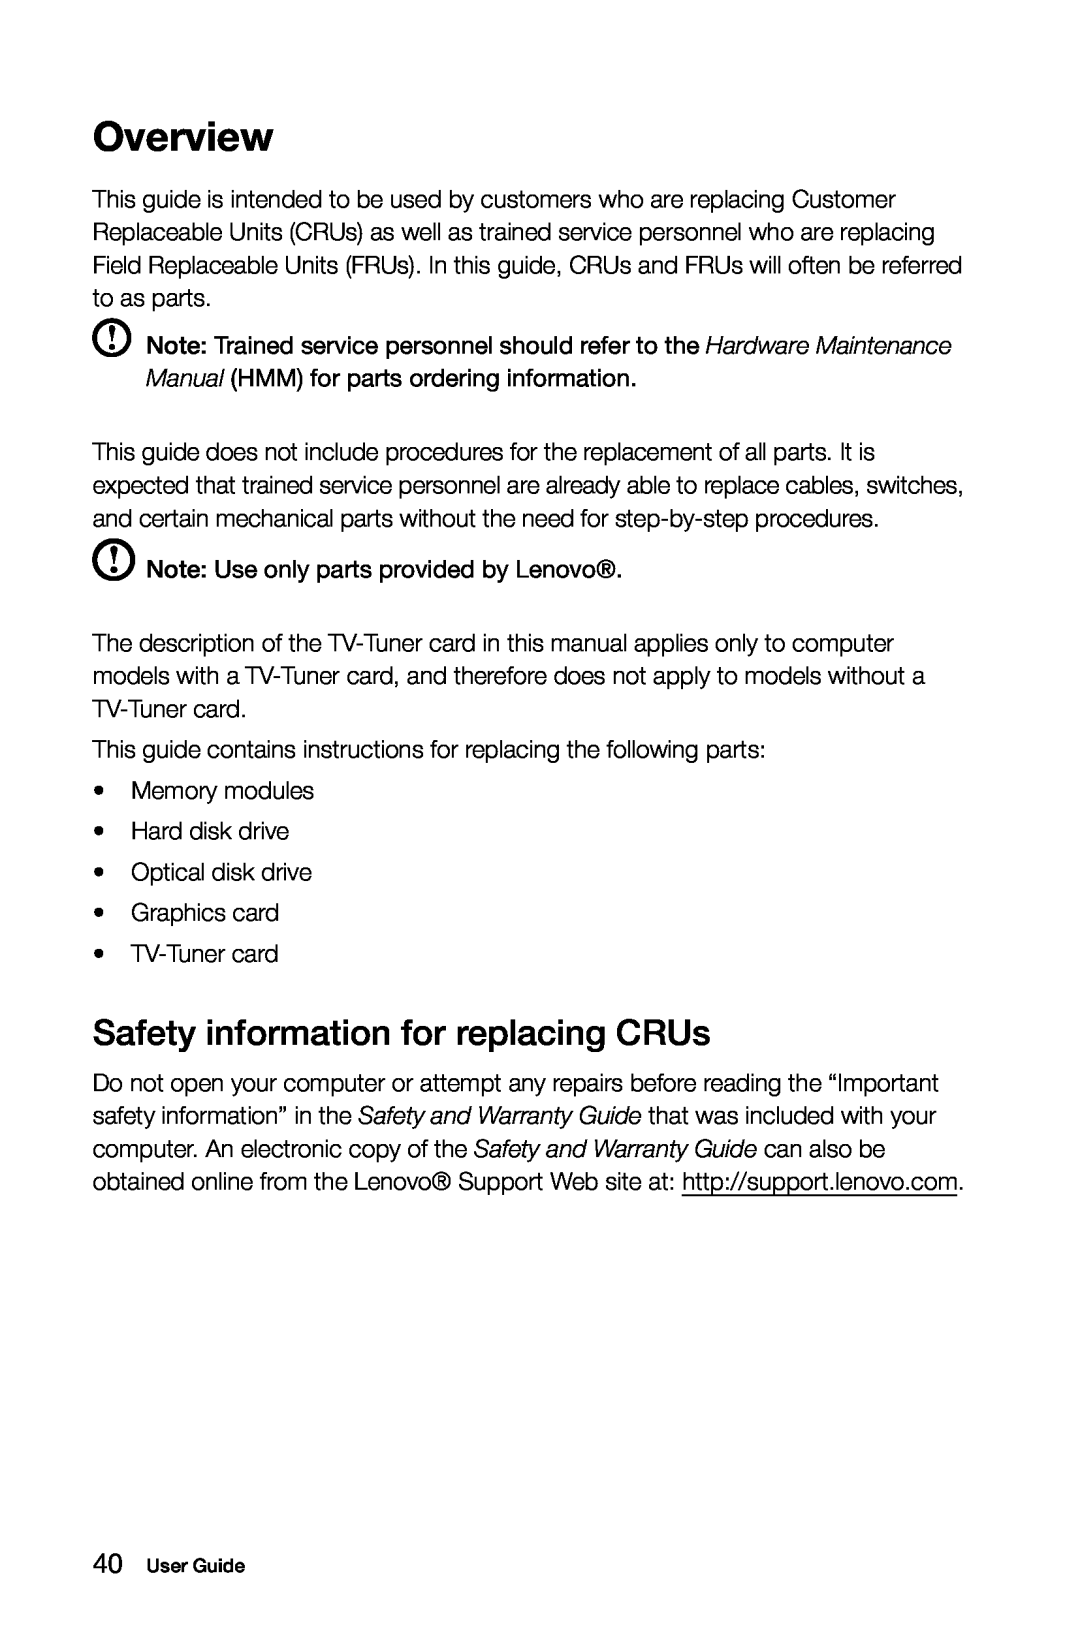 Lenovo 10121/90A1 [K450 ES], 10120/90A0 [K450 NON-ES] manual Overview, Safety information for replacing CRUs 